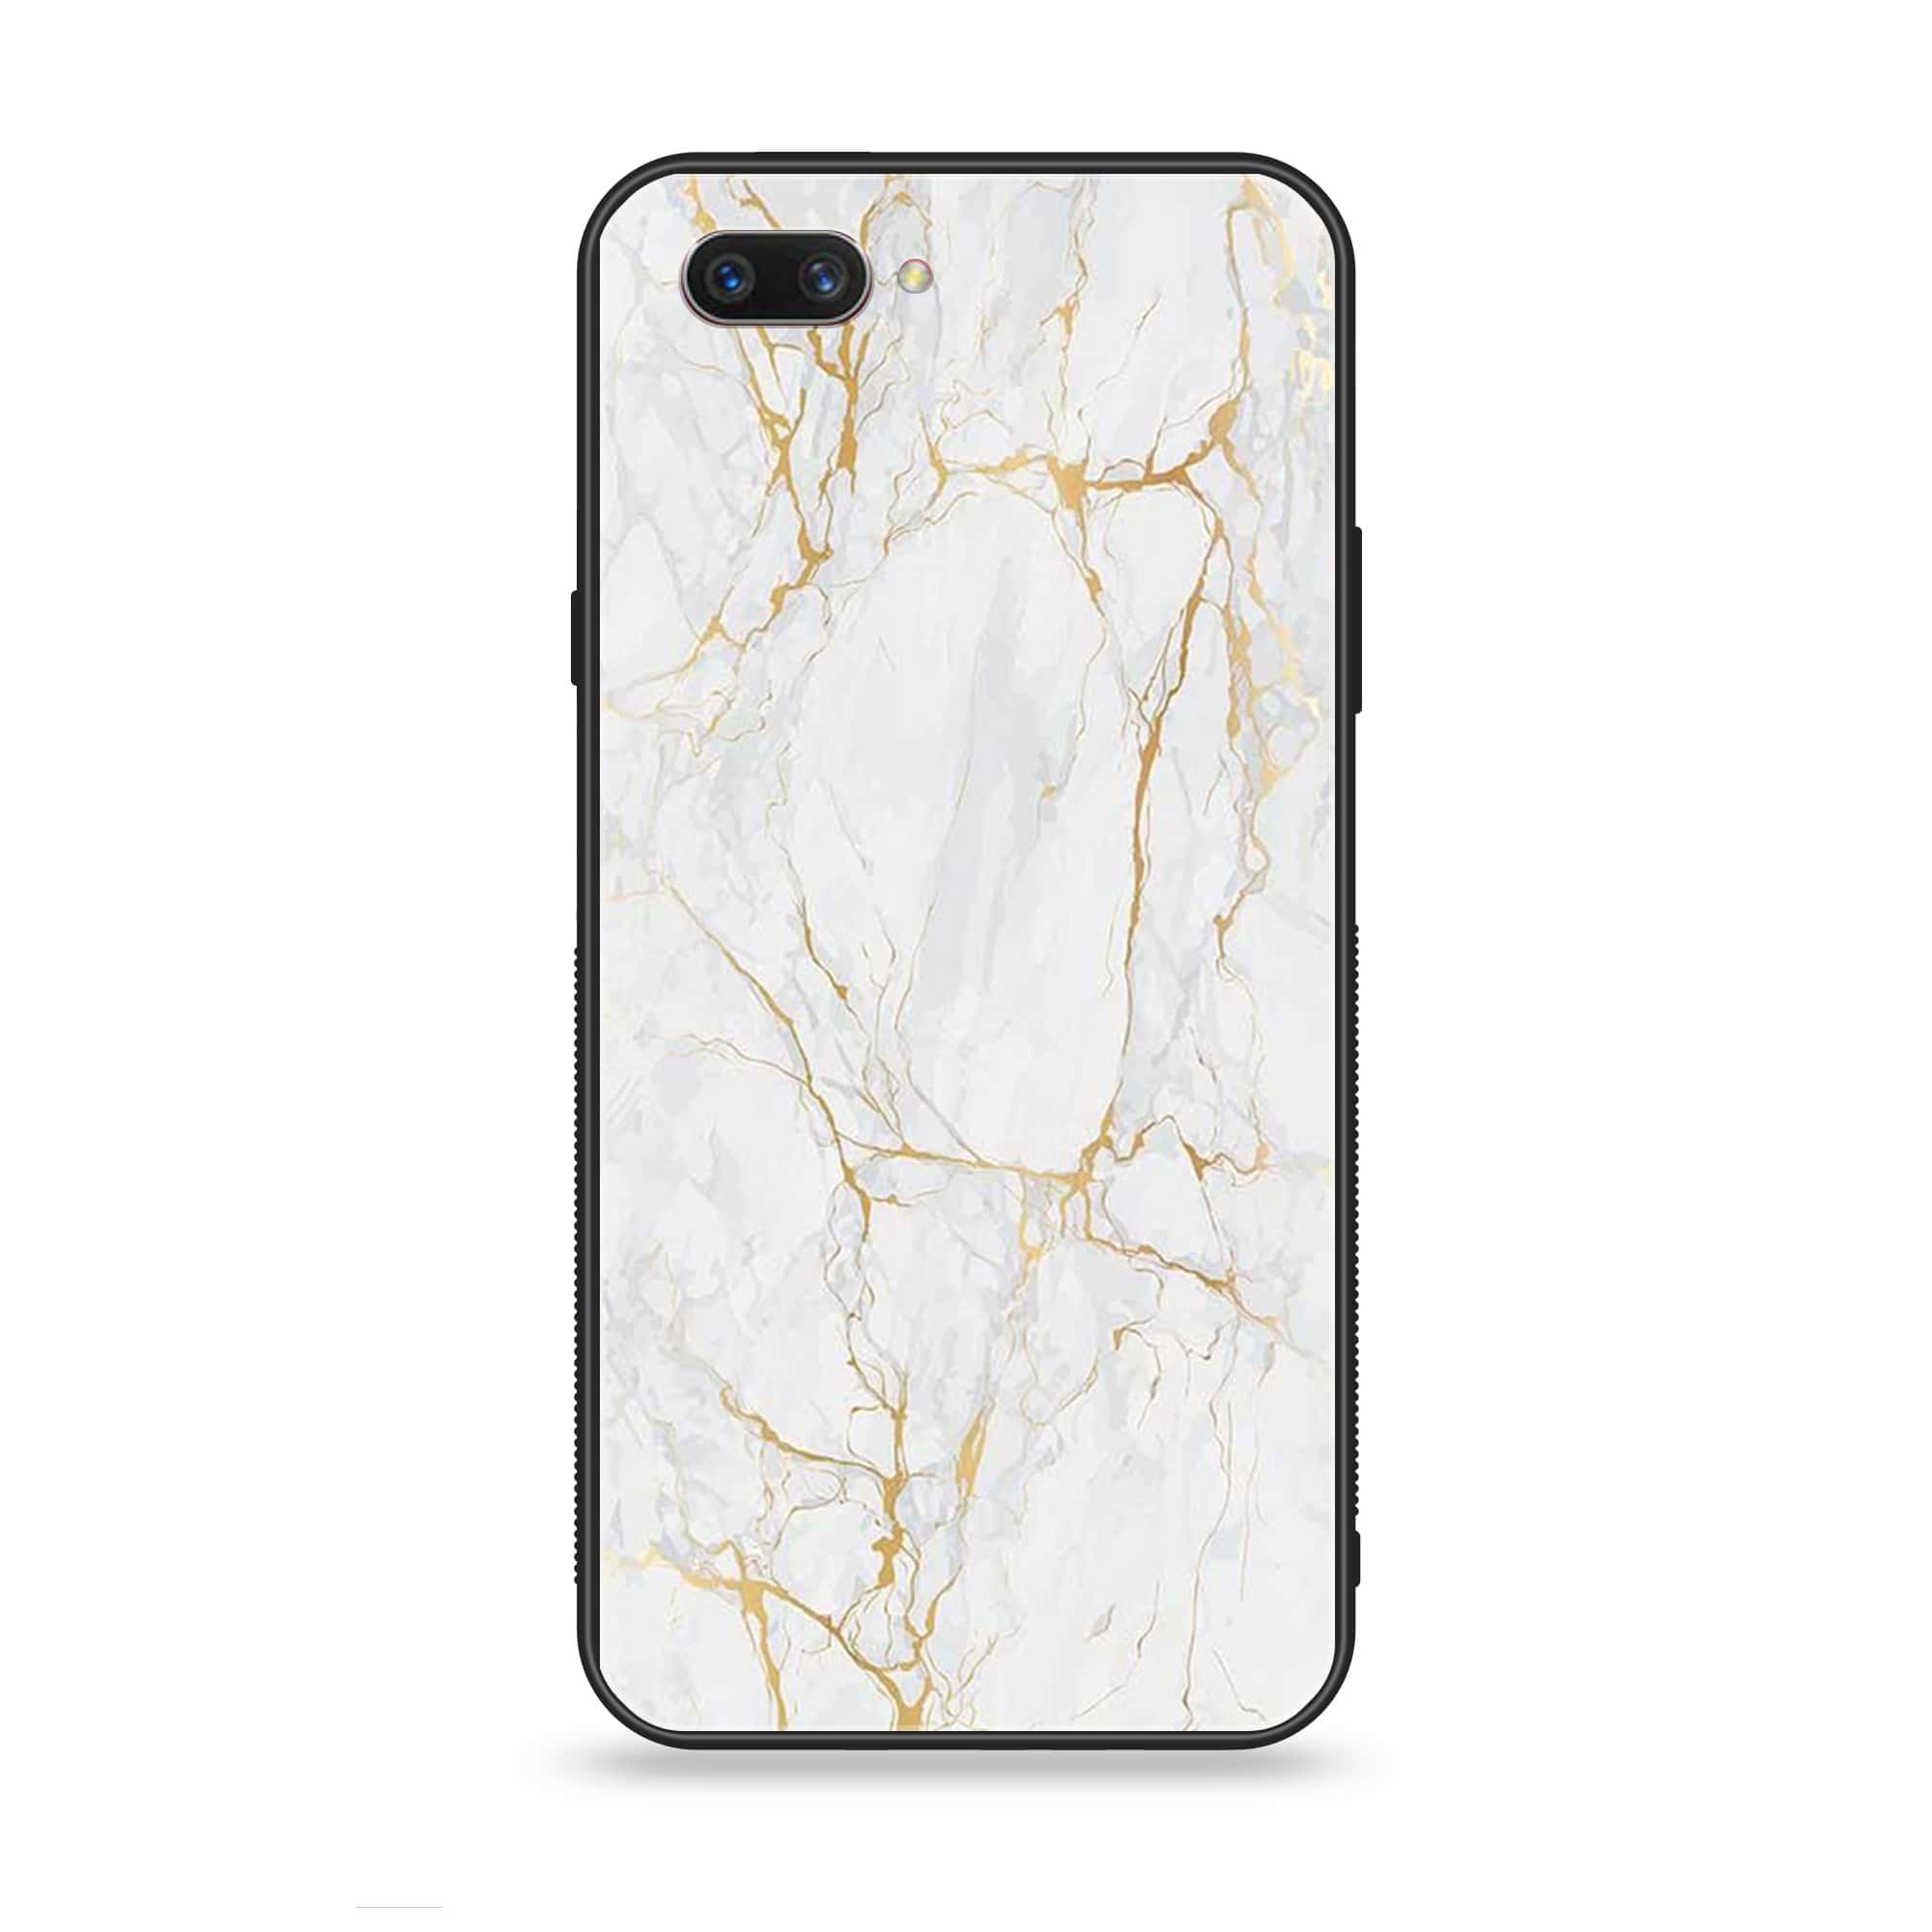 Oppo A3s - White Marble series - Premium Printed Glass soft Bumper shock Proof Case